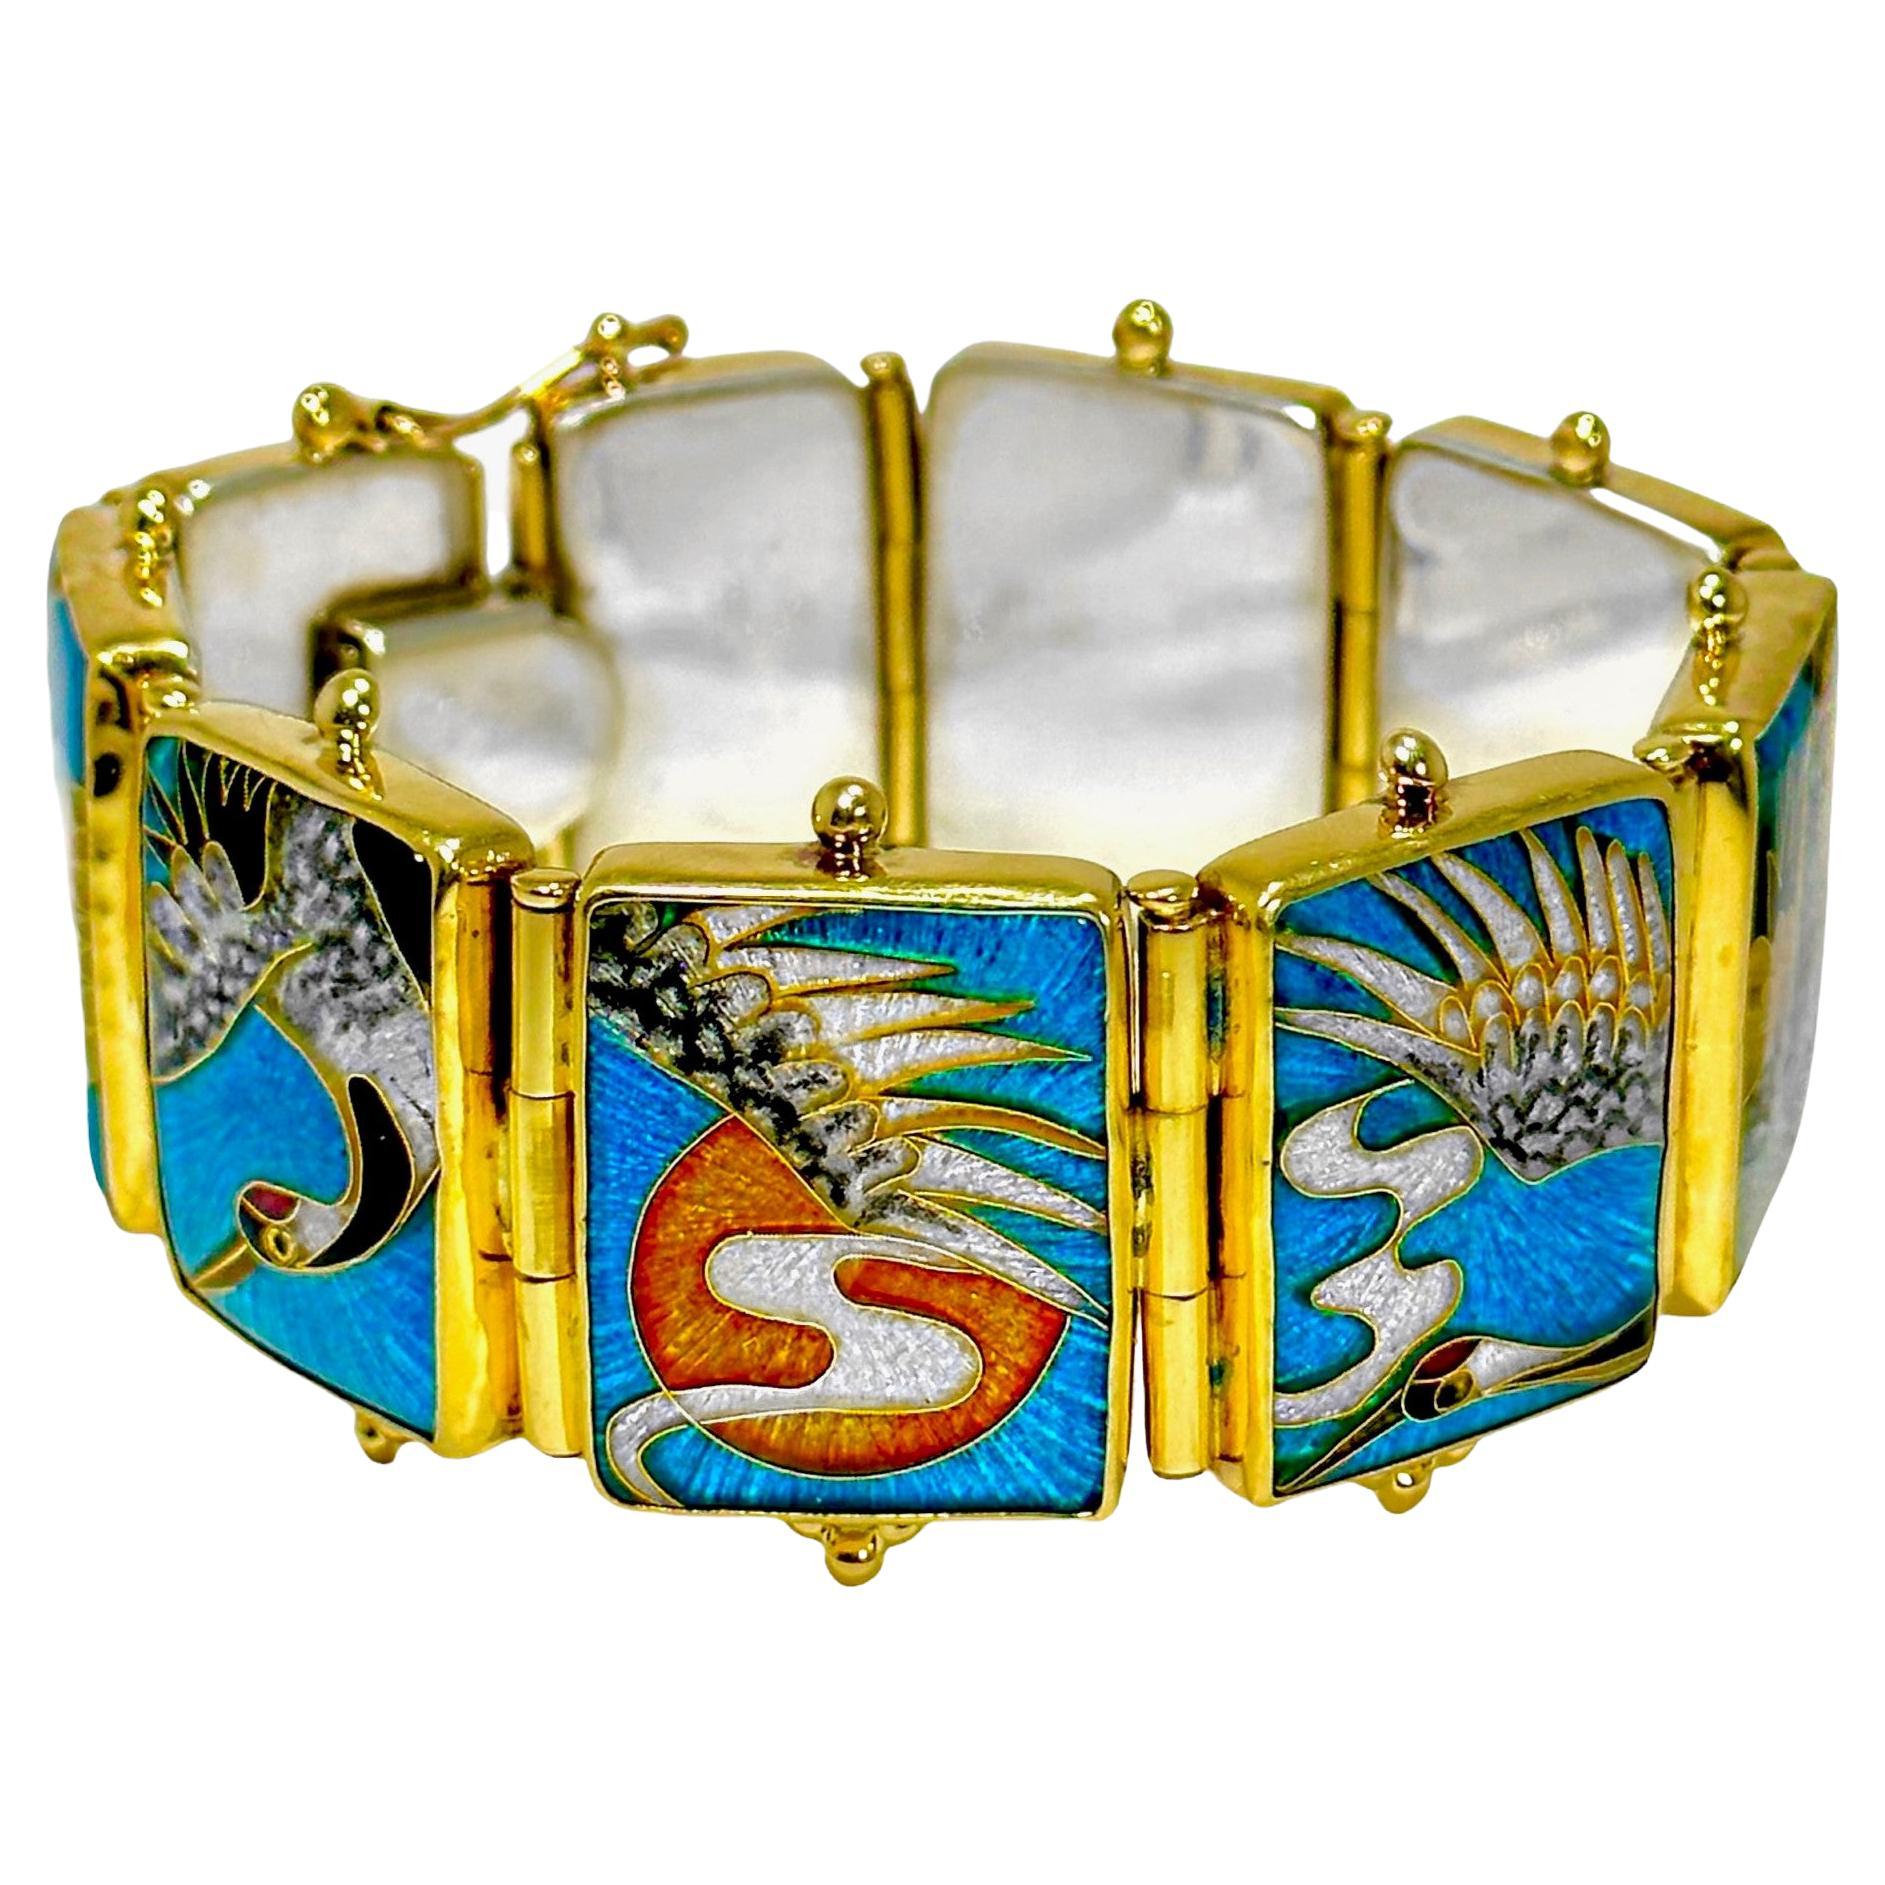 Exquisite Avian Fantasy in Gold, Silver and Cloisonne Enamel, by Tricia Young For Sale